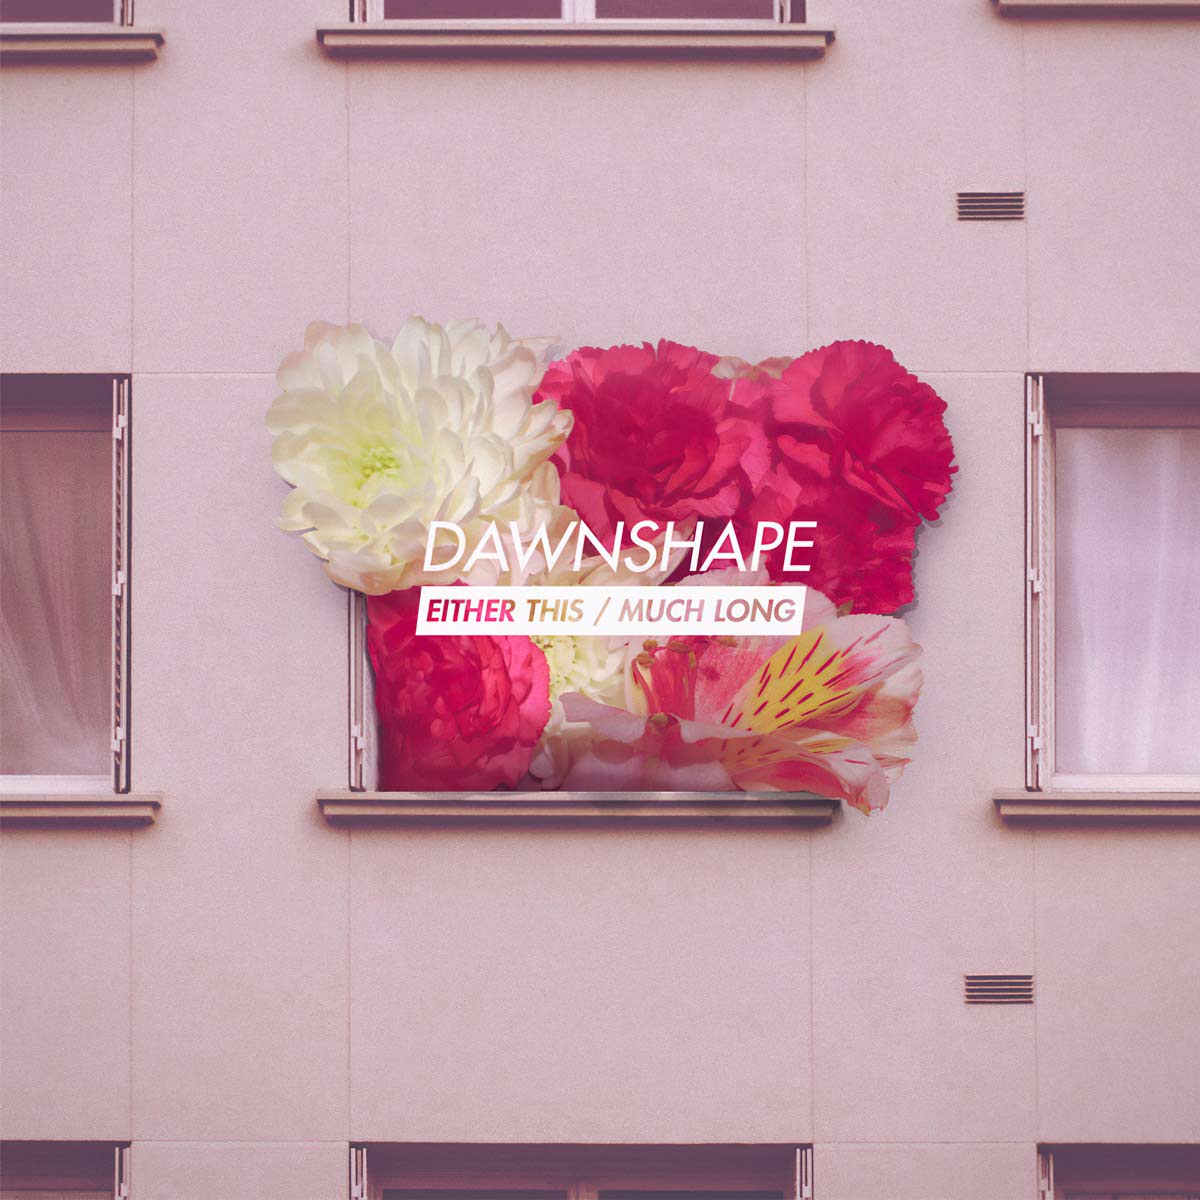 Dawnshape, Either This / Much Long, Digital Album Cover